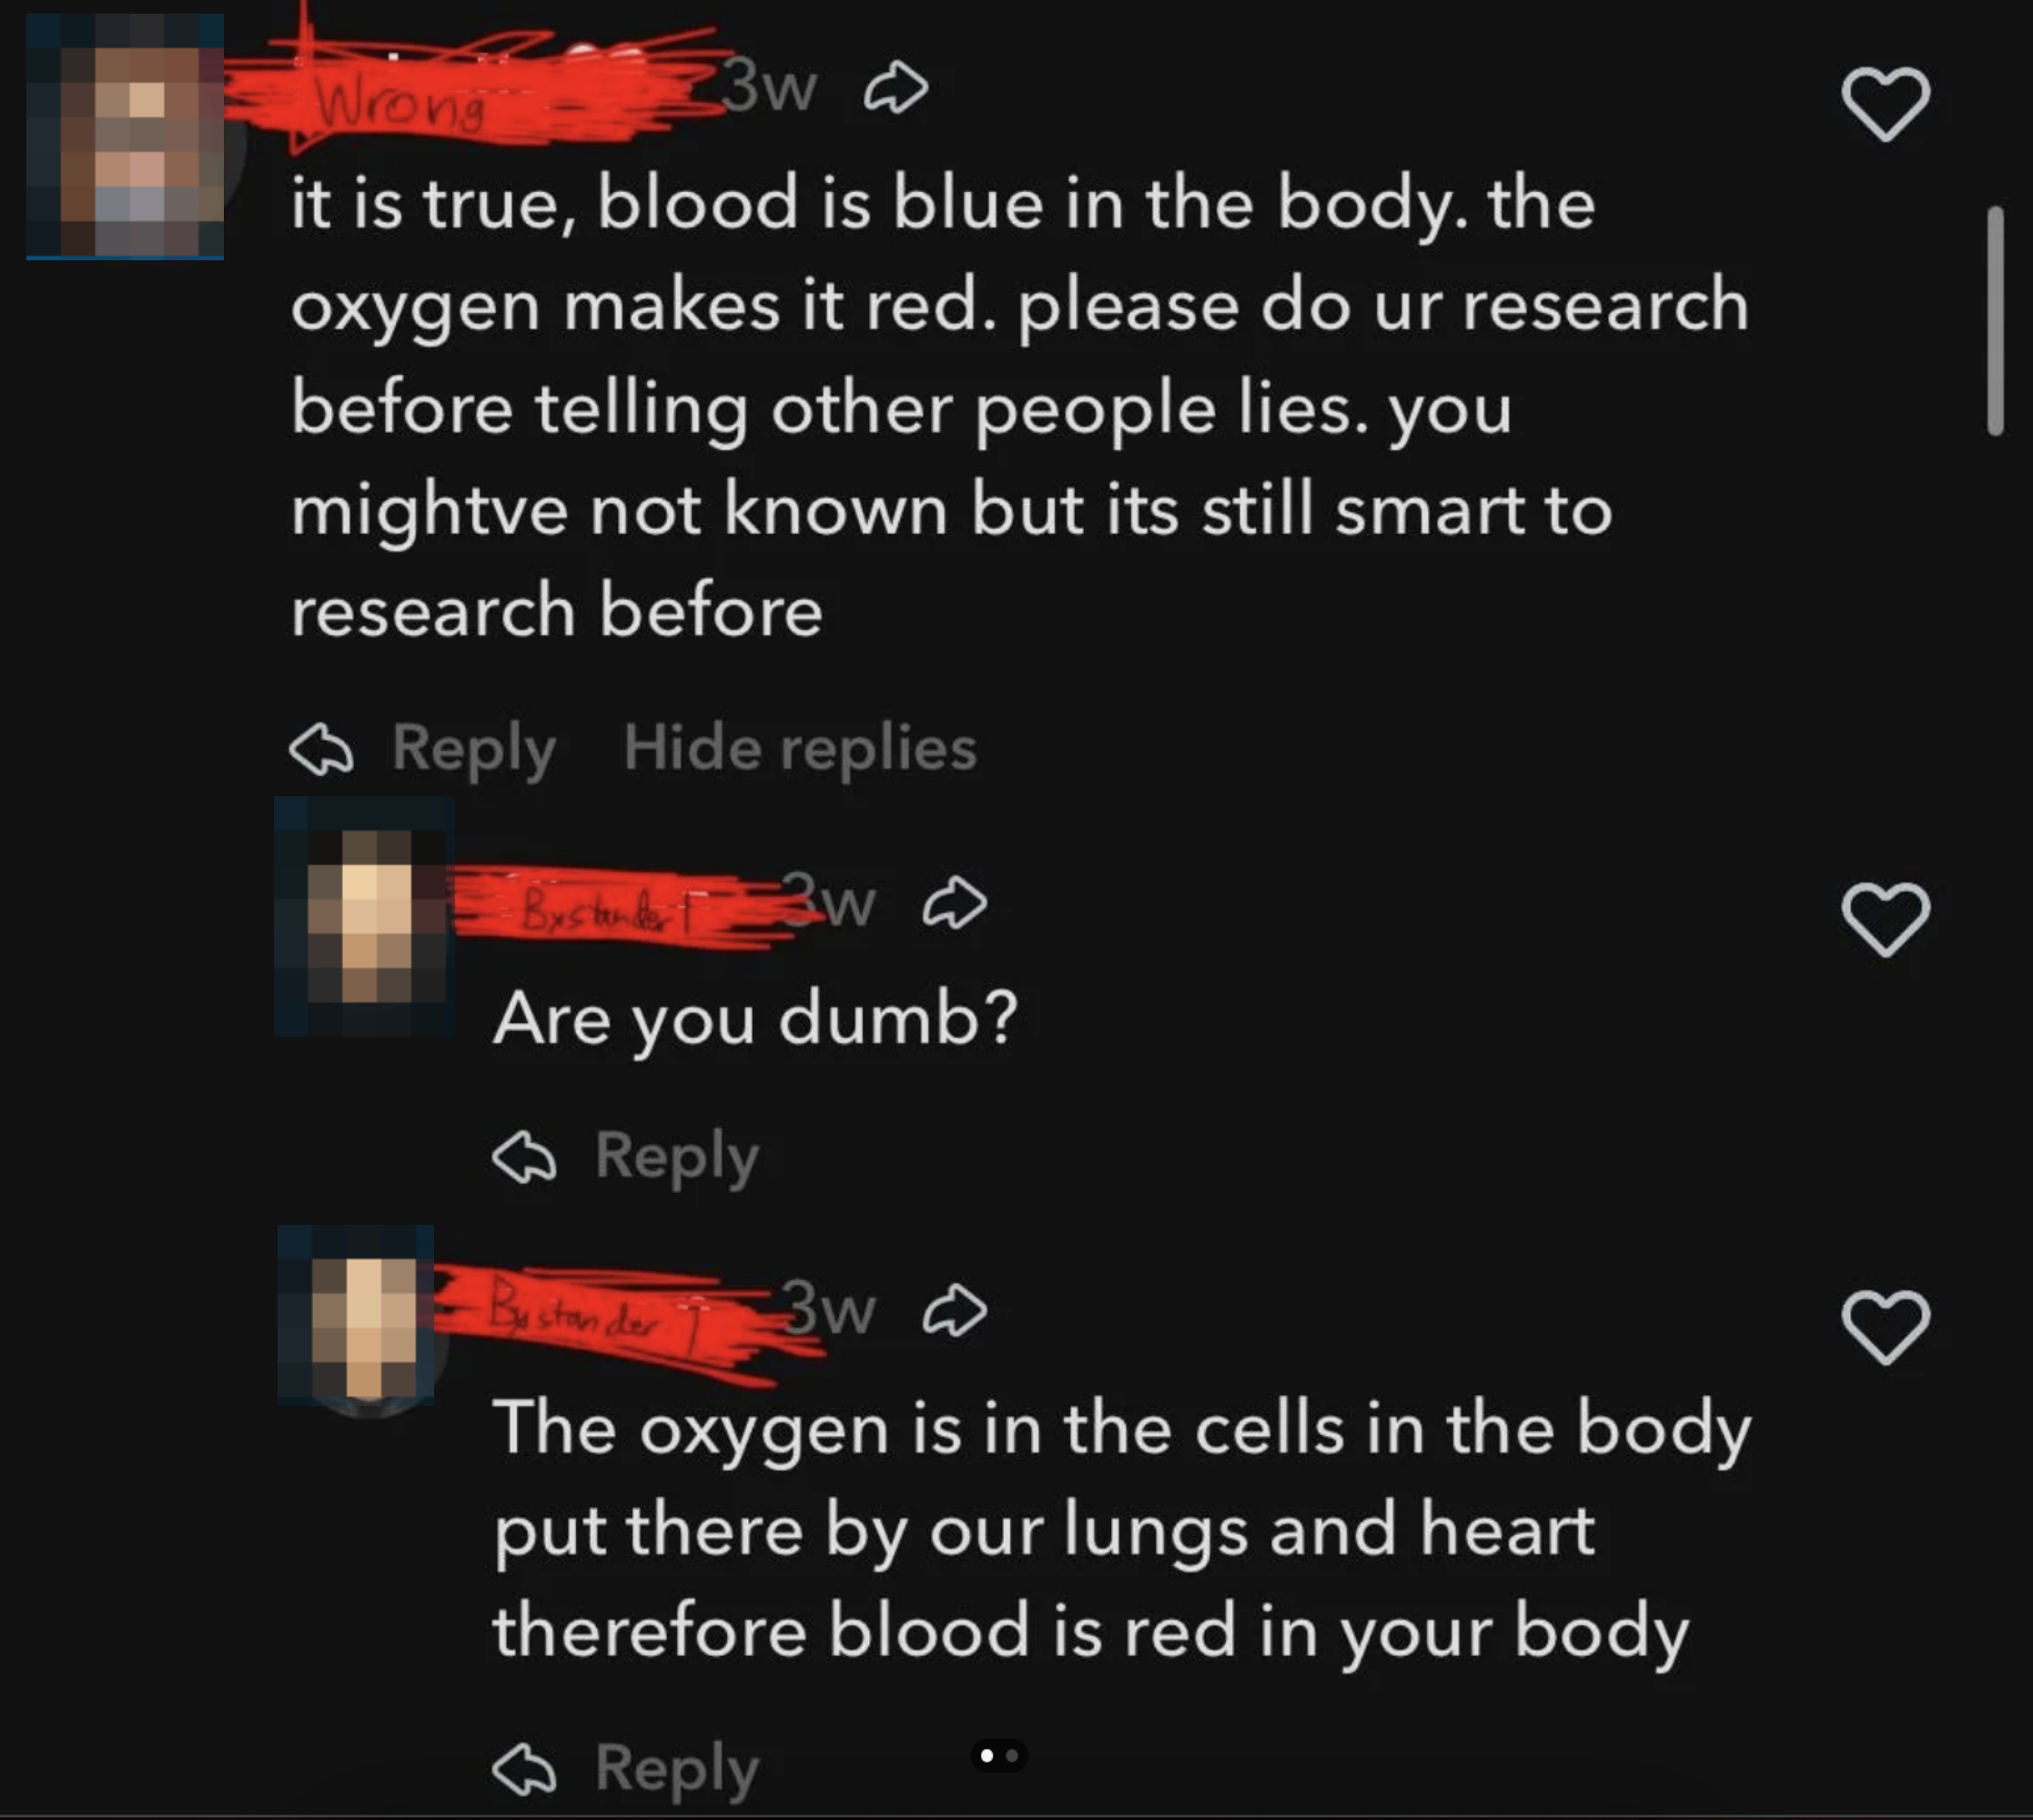 Screenshot of a social media debate where a user claims blood is blue inside the body, countered by others correcting it&#x27;s always red due to oxygen